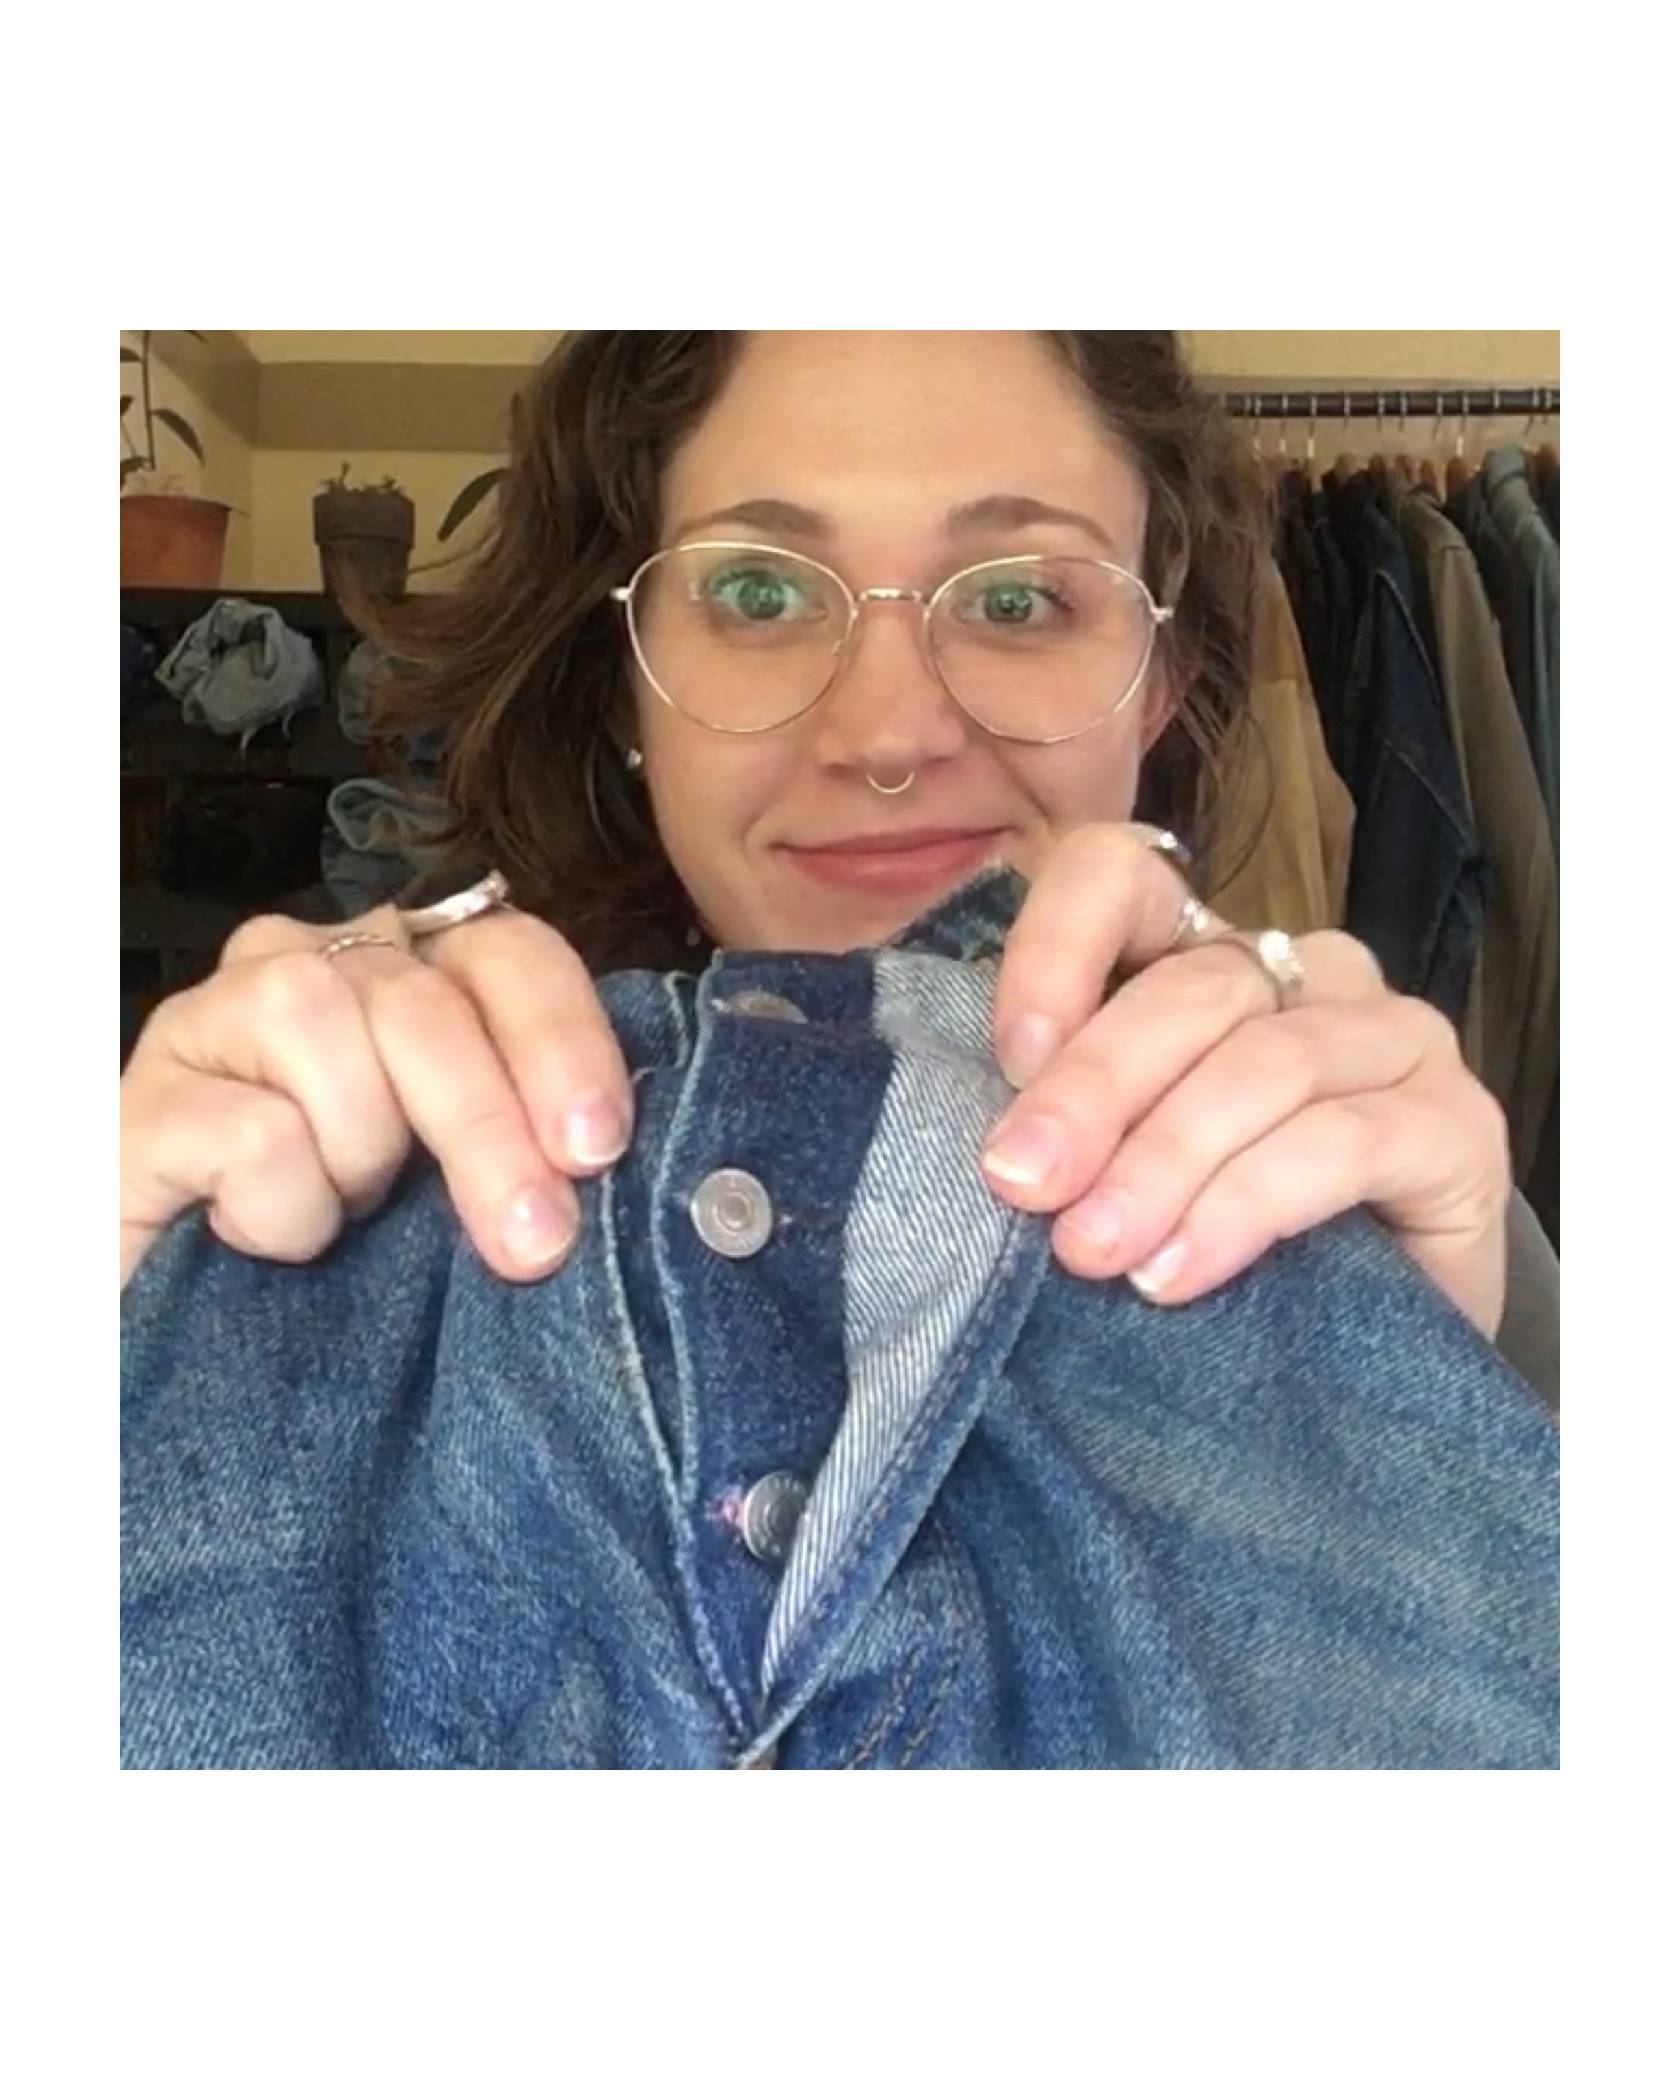 Levi's® Tailor Jen Sharkey holding up a pair of jeans, showing the repaired buttonhole on the button fly of a pair of jeans.